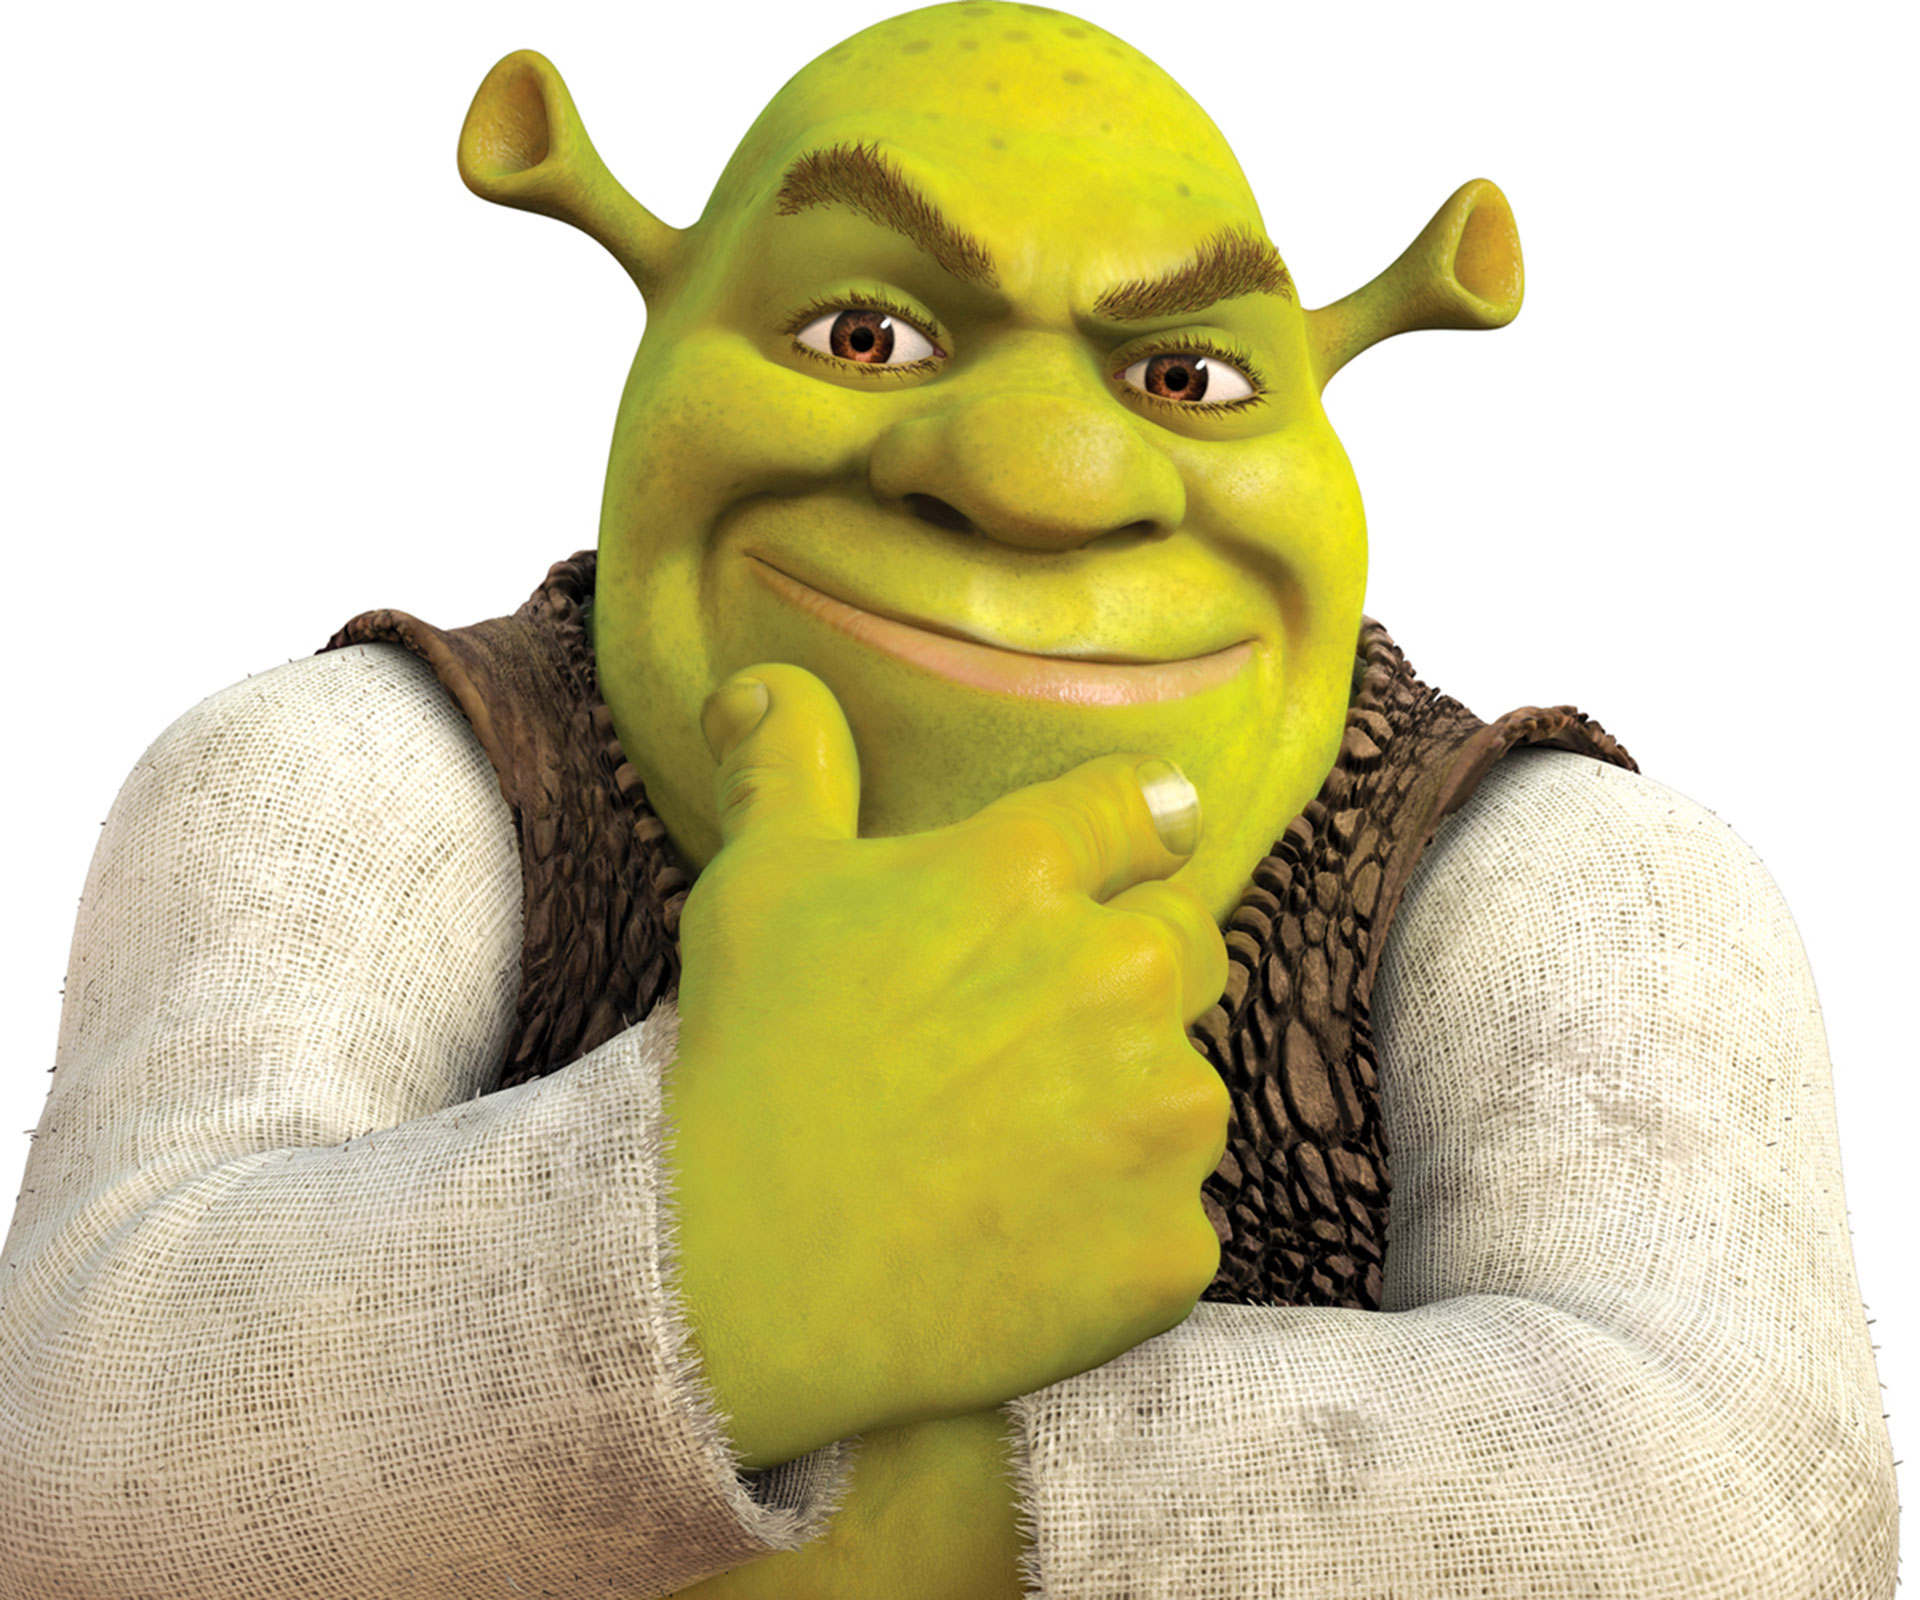 Shrek turns 15 (and other things that will make you feel old)